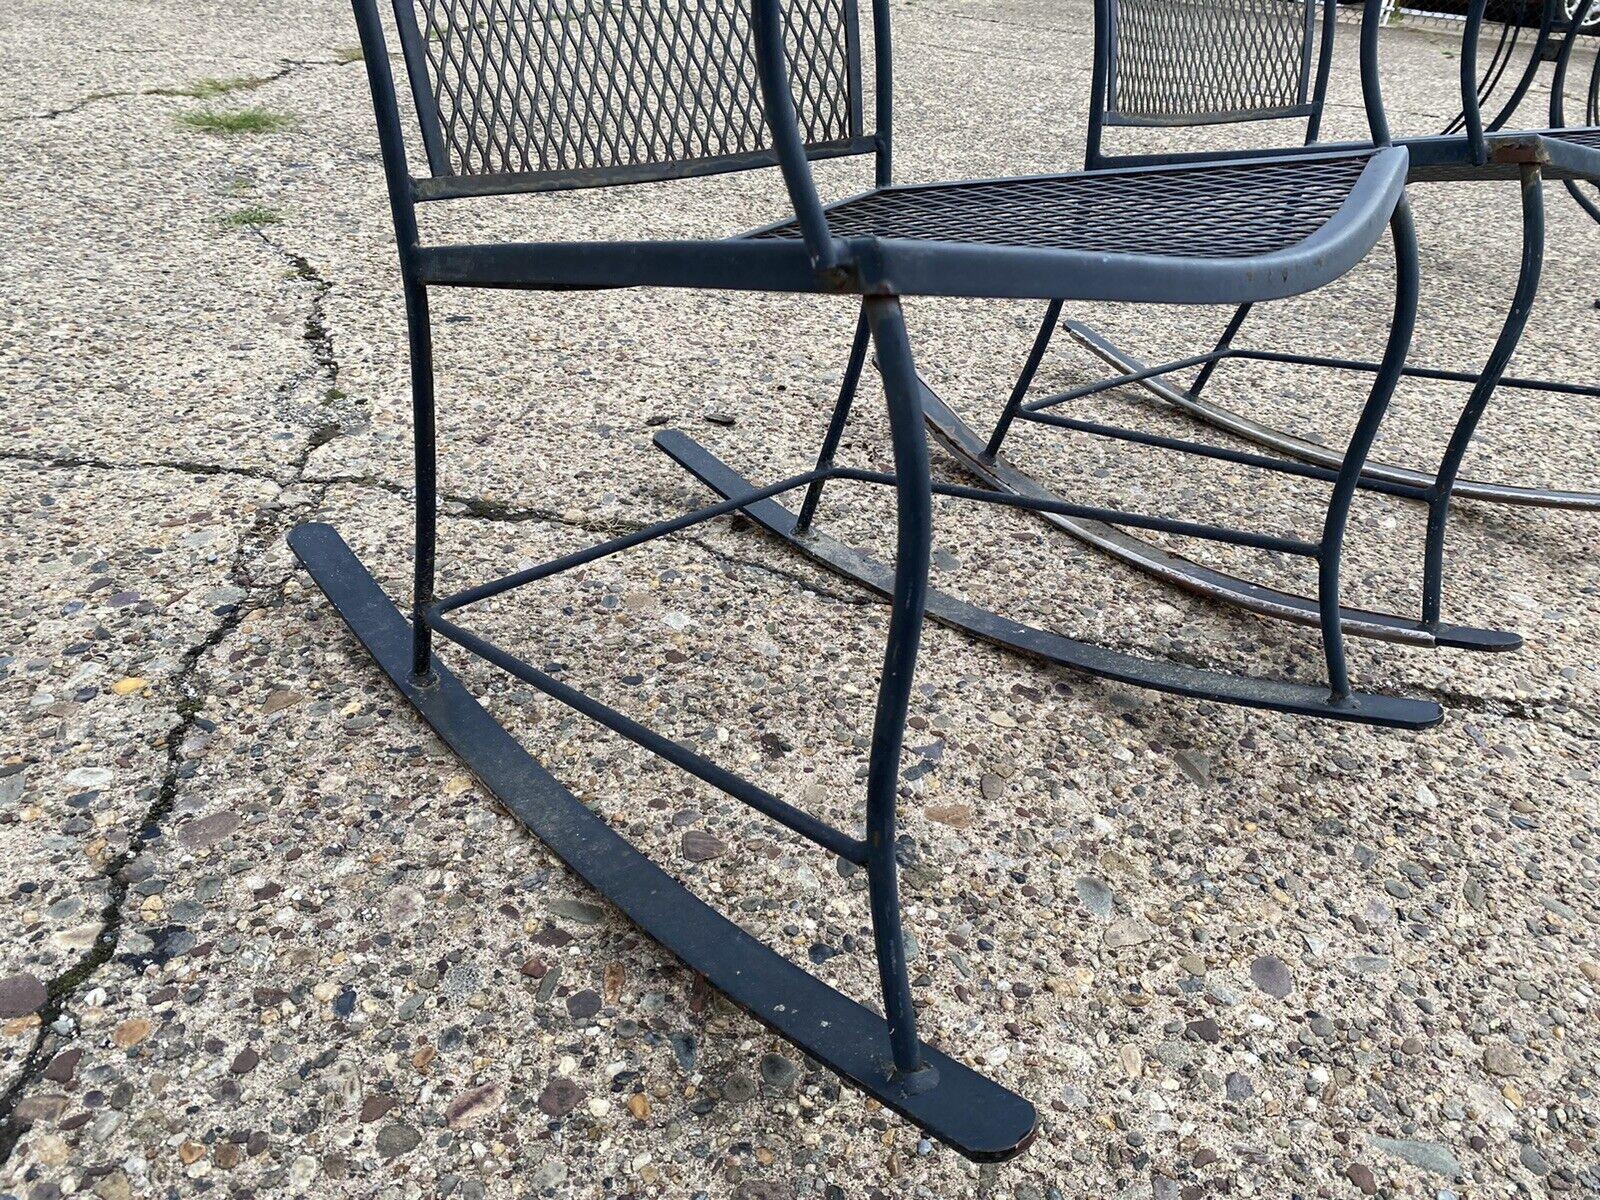 20th Century Vintage Wrought Iron Victorian Style Garden Patio Rocker Rocking Chairs - a Pair For Sale